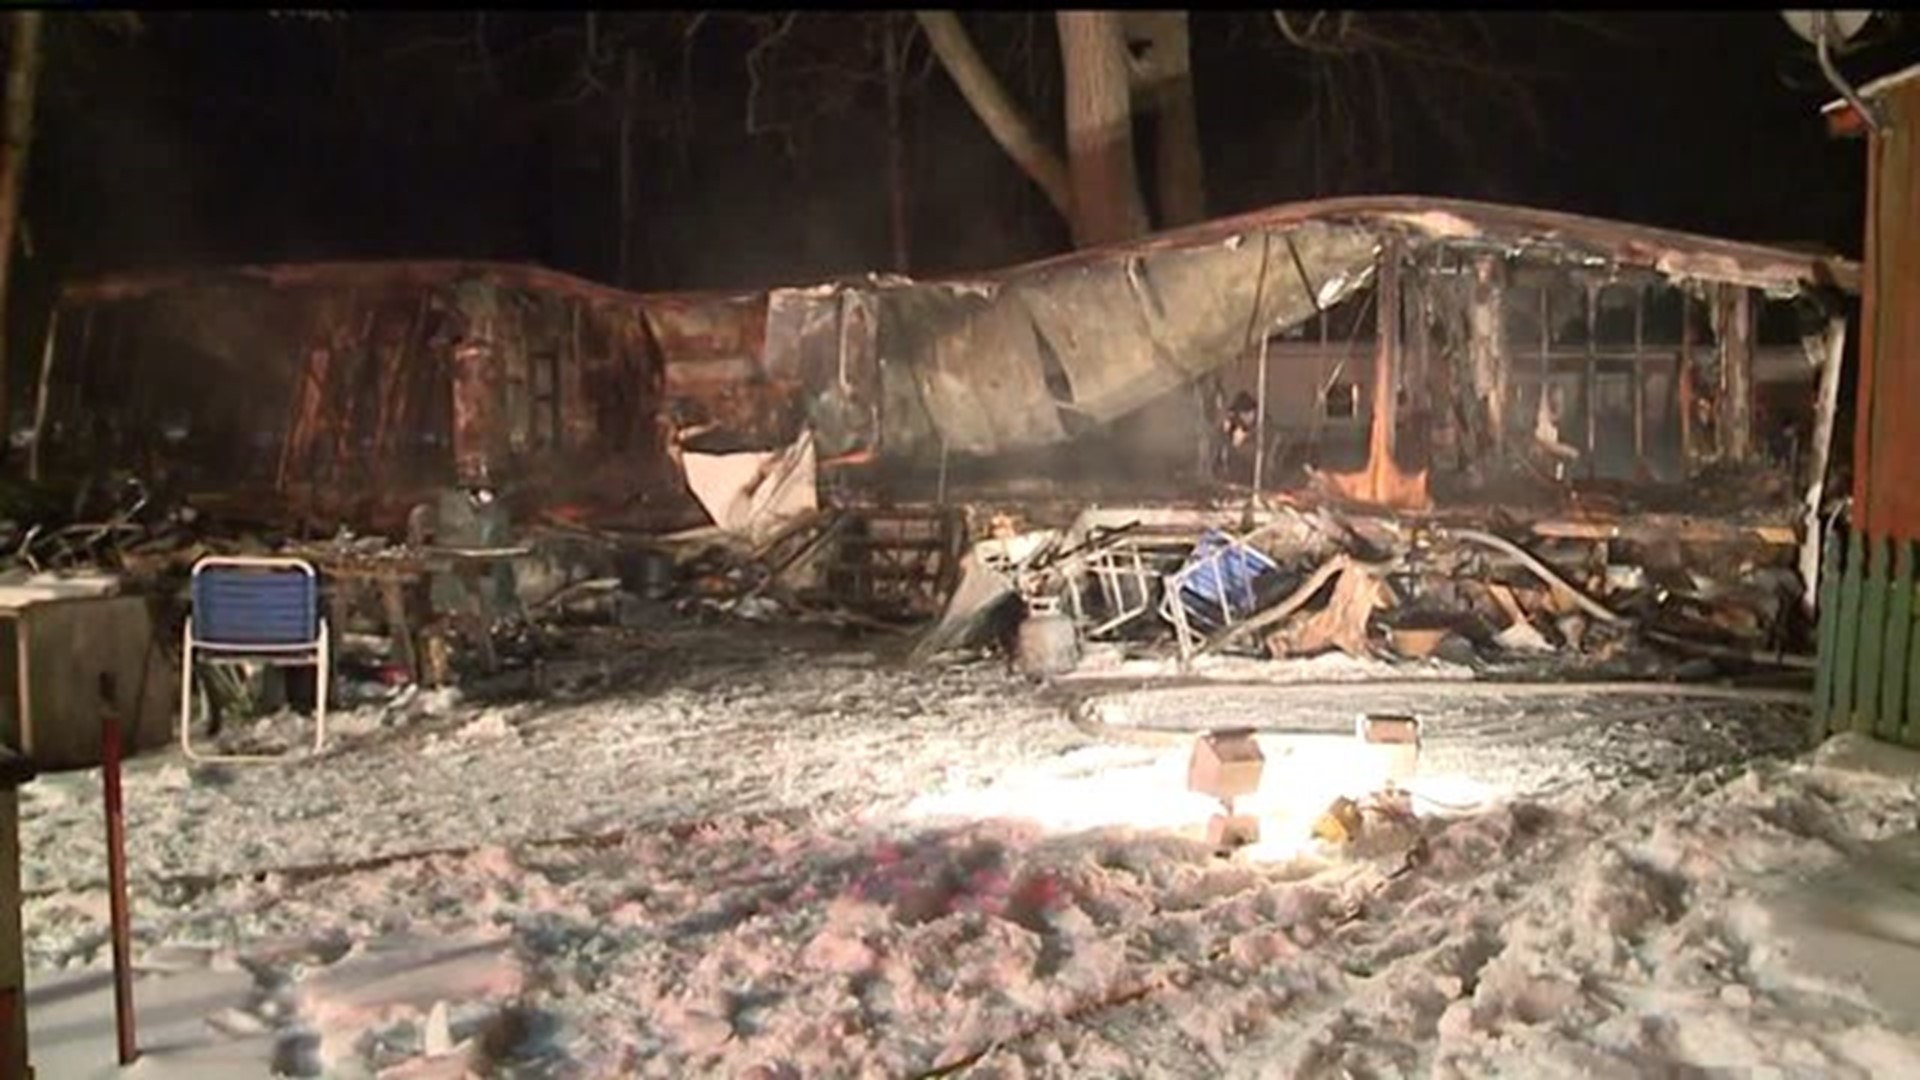 Crews battle mobile home fire in Dauphin County